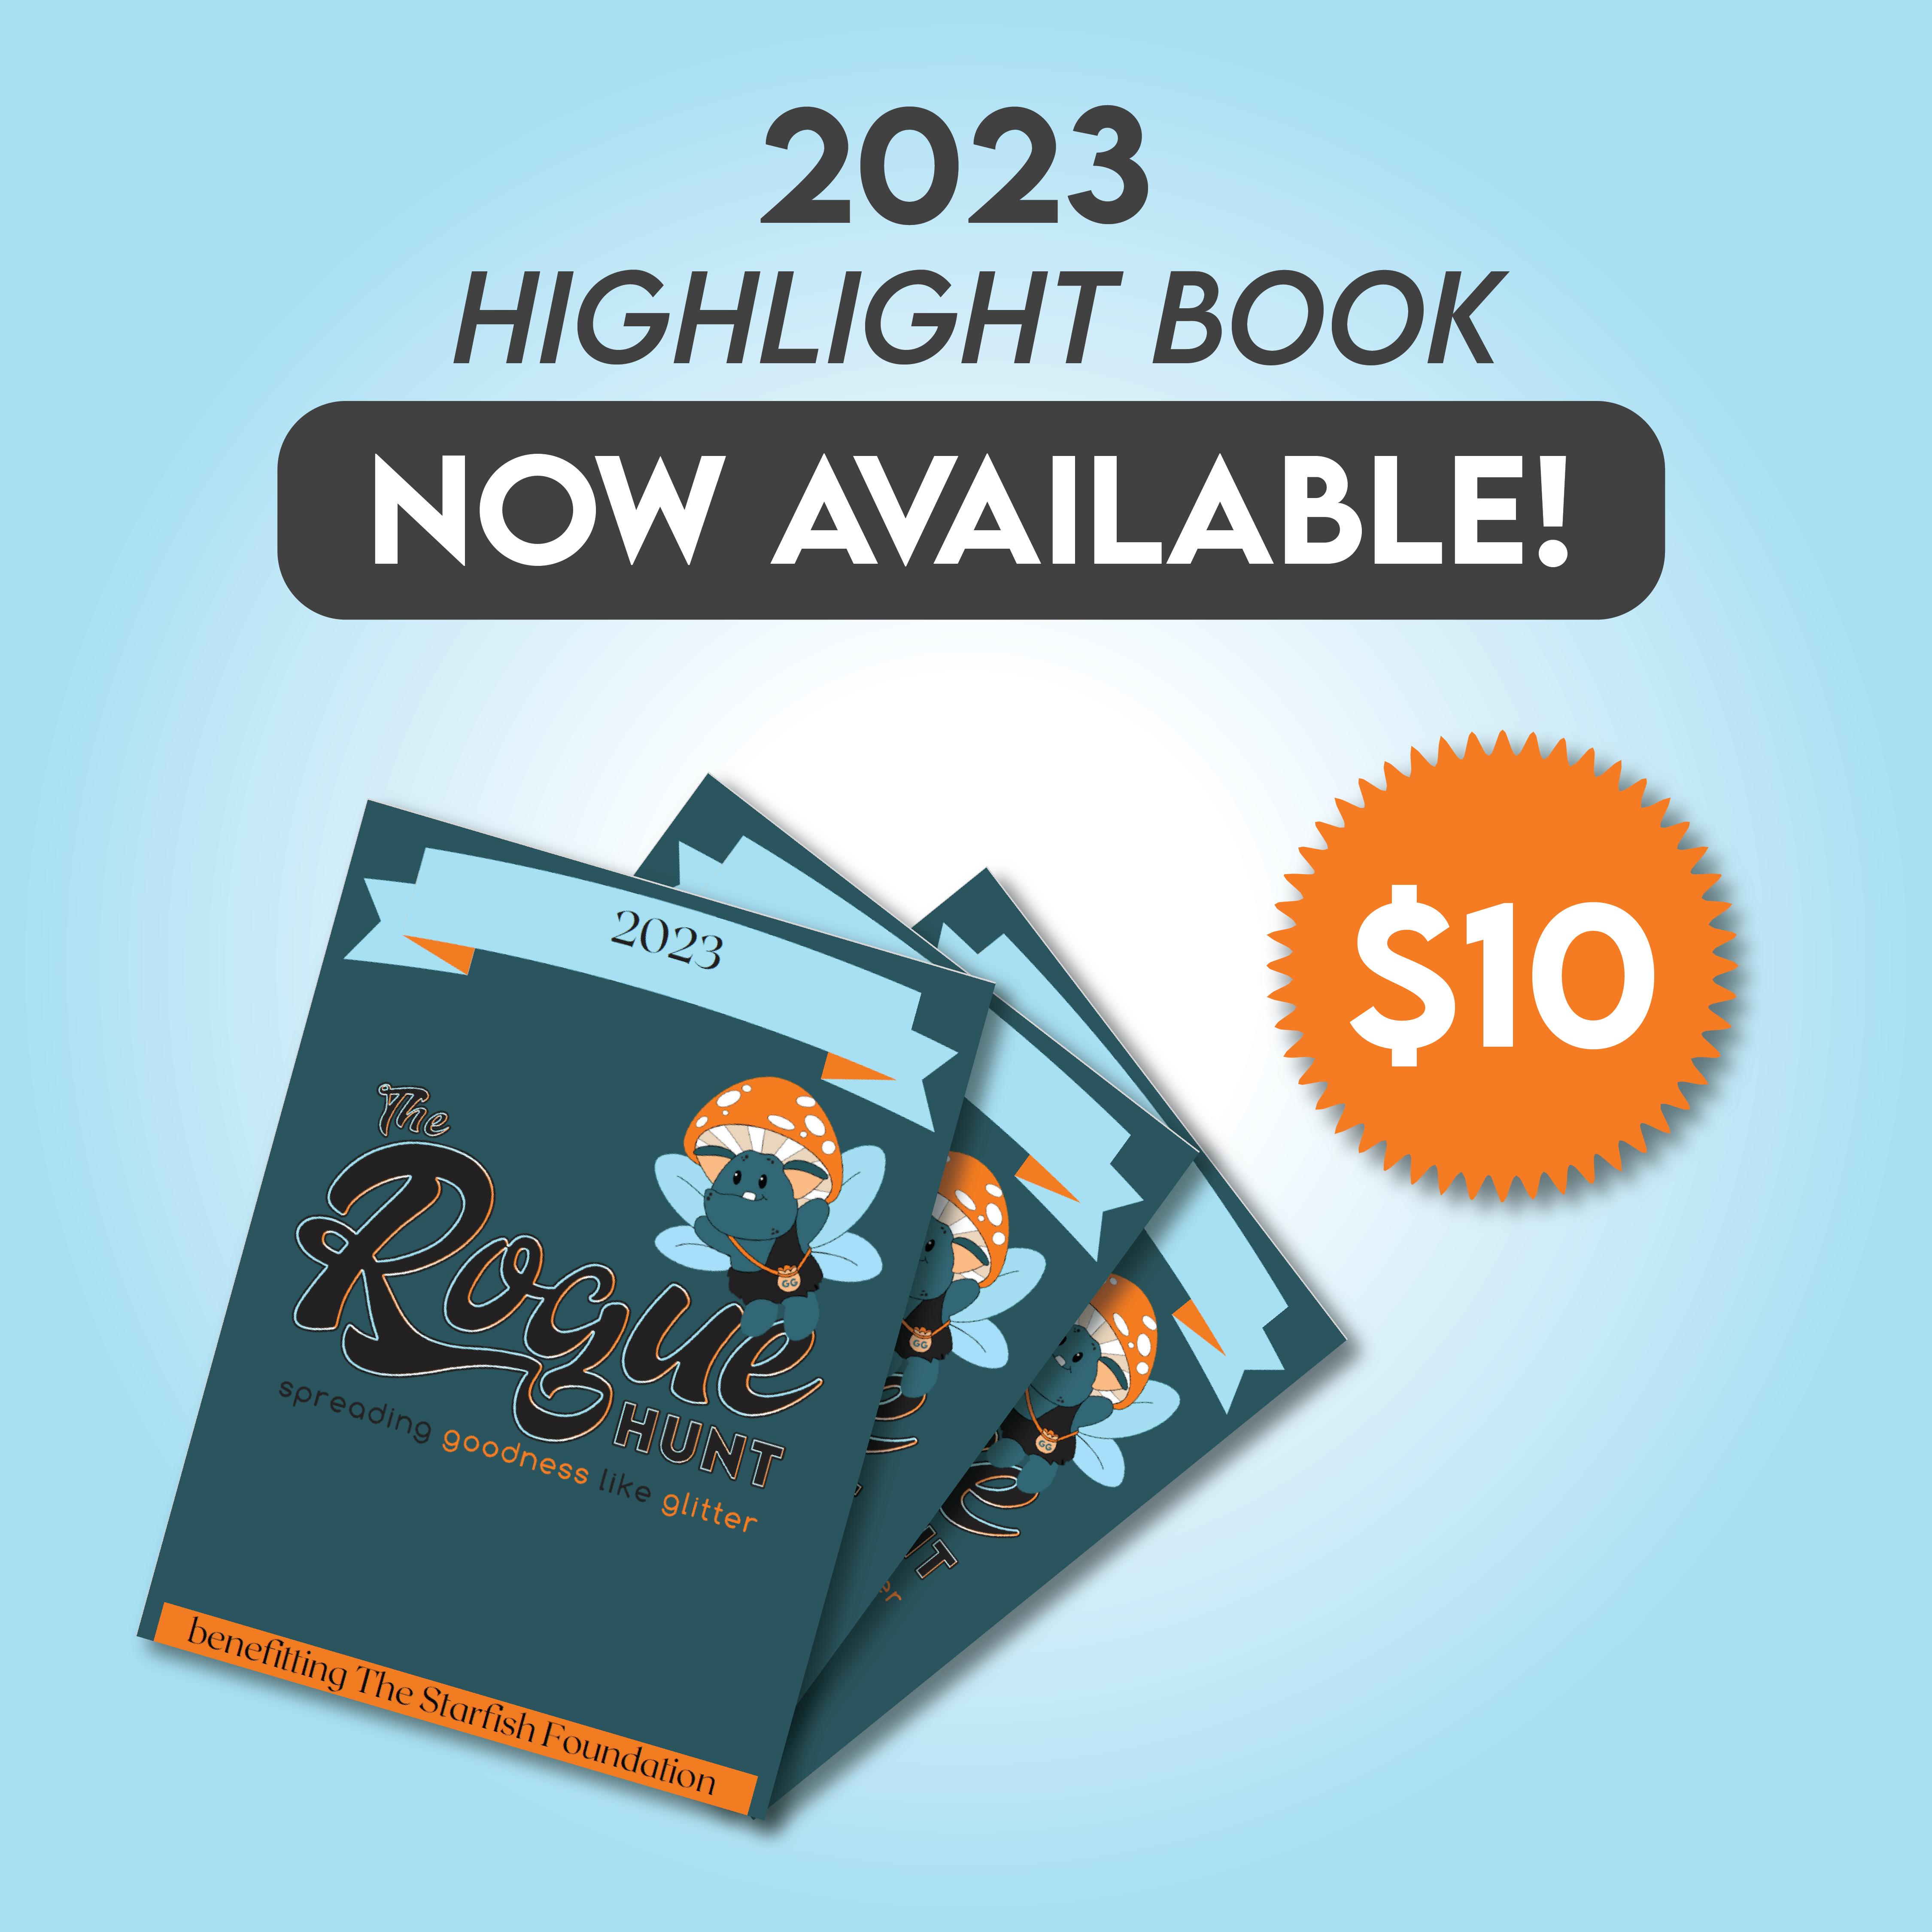 2023 Highlight Book Now Available: $10. Stack of three highlight books. They are dark teal with Eugene and the Rogue hunt logo on the cover as well as the date (2023) and the words "benefitting The Starfish Foundation"